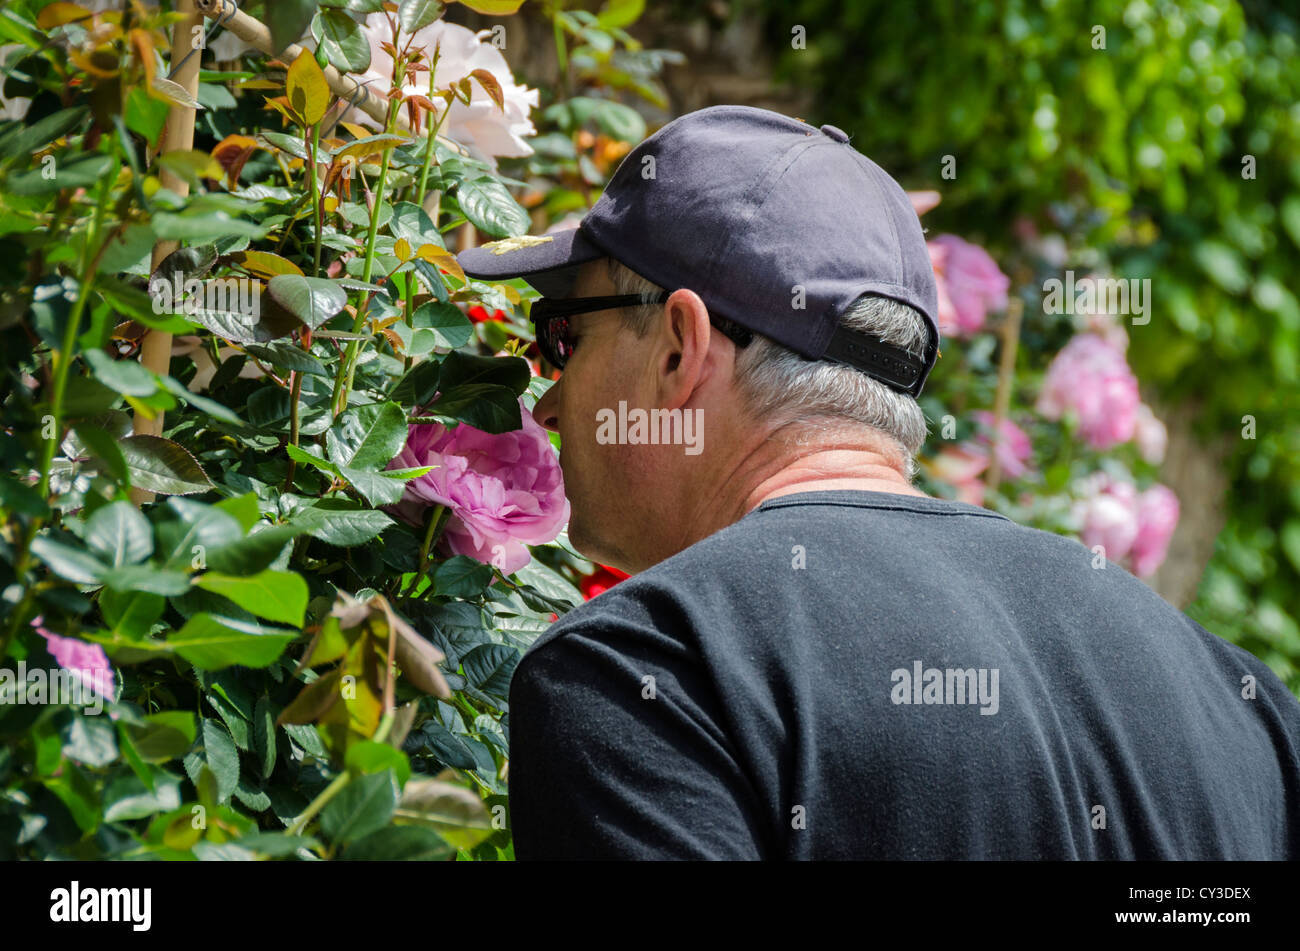 Man smelling a rose at the Rose Festival, La Colle sur Loup, Provence, France Stock Photo